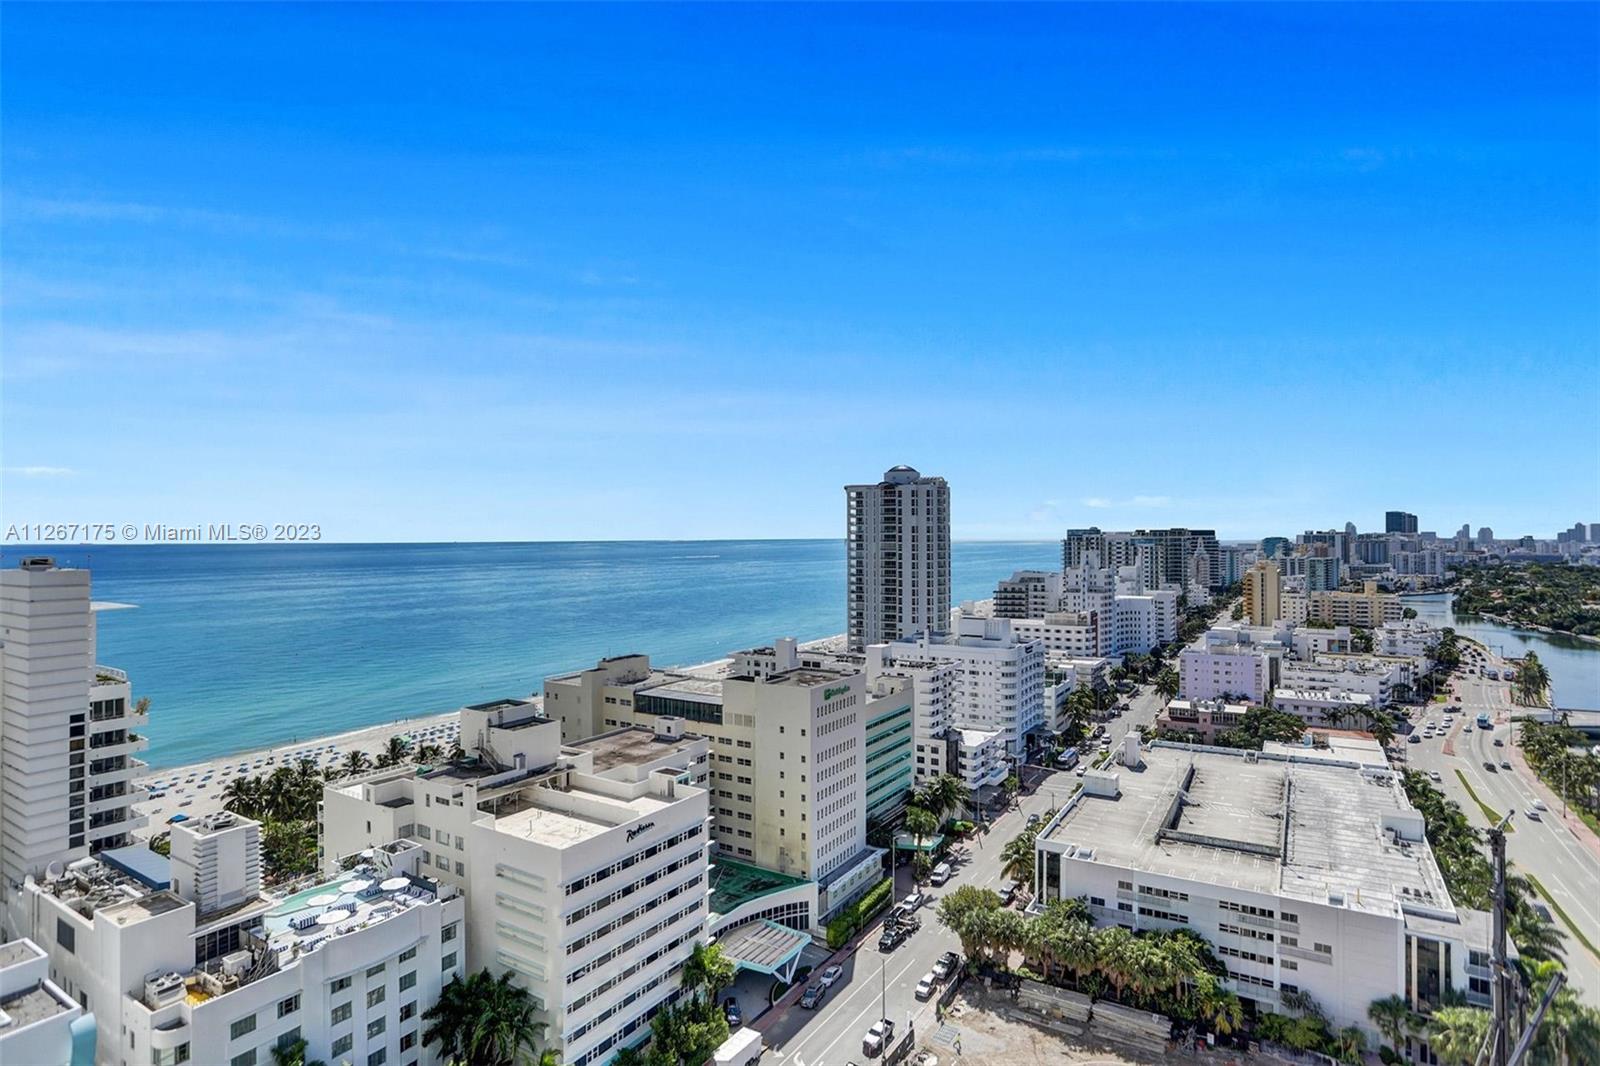 Enjoy gorgeous ocean and city views from this corner 2BD/3BA on the 21st floor at Fontainebleau II. This beautiful double unit shares a private entrance foyer, has 3 balconies and is furnished turnkey with 2 king beds, 2 sleeper sofas, a full kitchen and washer/dryer. Enjoy full service, vacation-style living!  The Fontainebleau Resort offers luxury amenities on 22 oceanfront acres including award-winning restaurants, LIV night club, Lapis spa & state-of-the-art fitness center. Maintenance includes: AC, local calls, electricity, valet + daily free breakfast in the owner’s lounge.
 Click the virtual tour link to see video of property & contact me directly for more info.